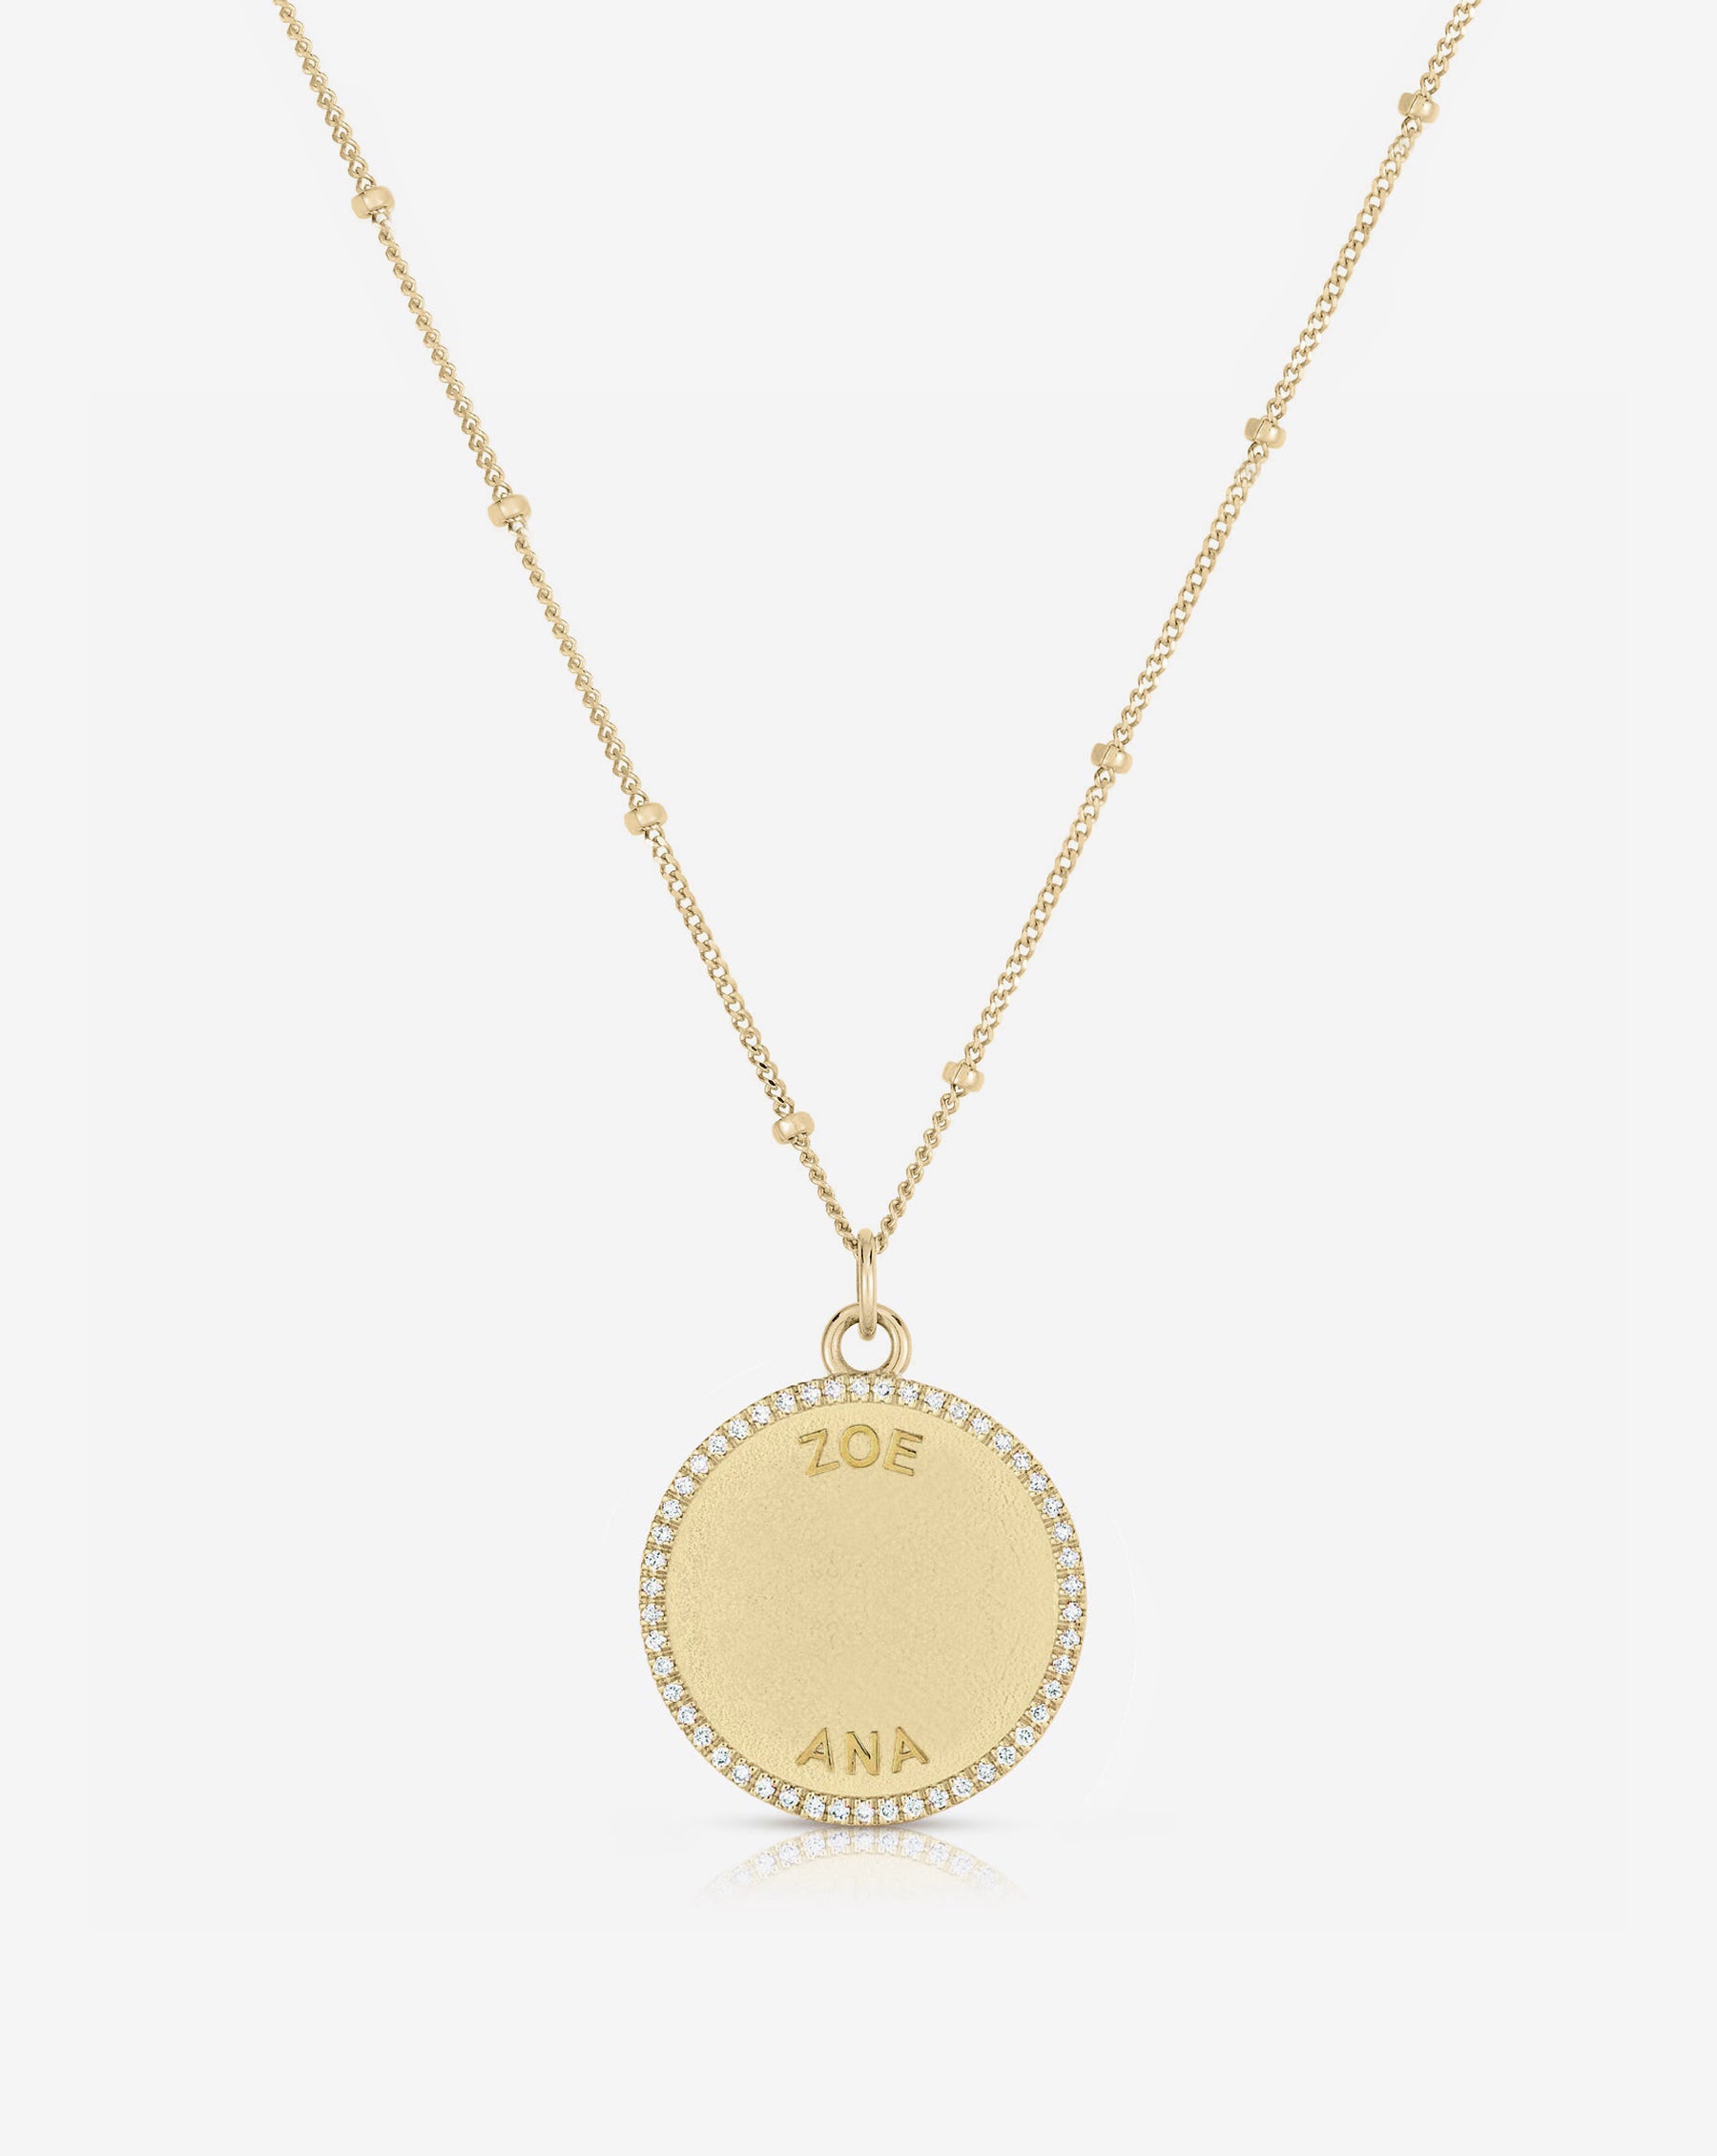 Ring Concierge Necklaces 14k Yellow Gold Personalized Medallion Necklace